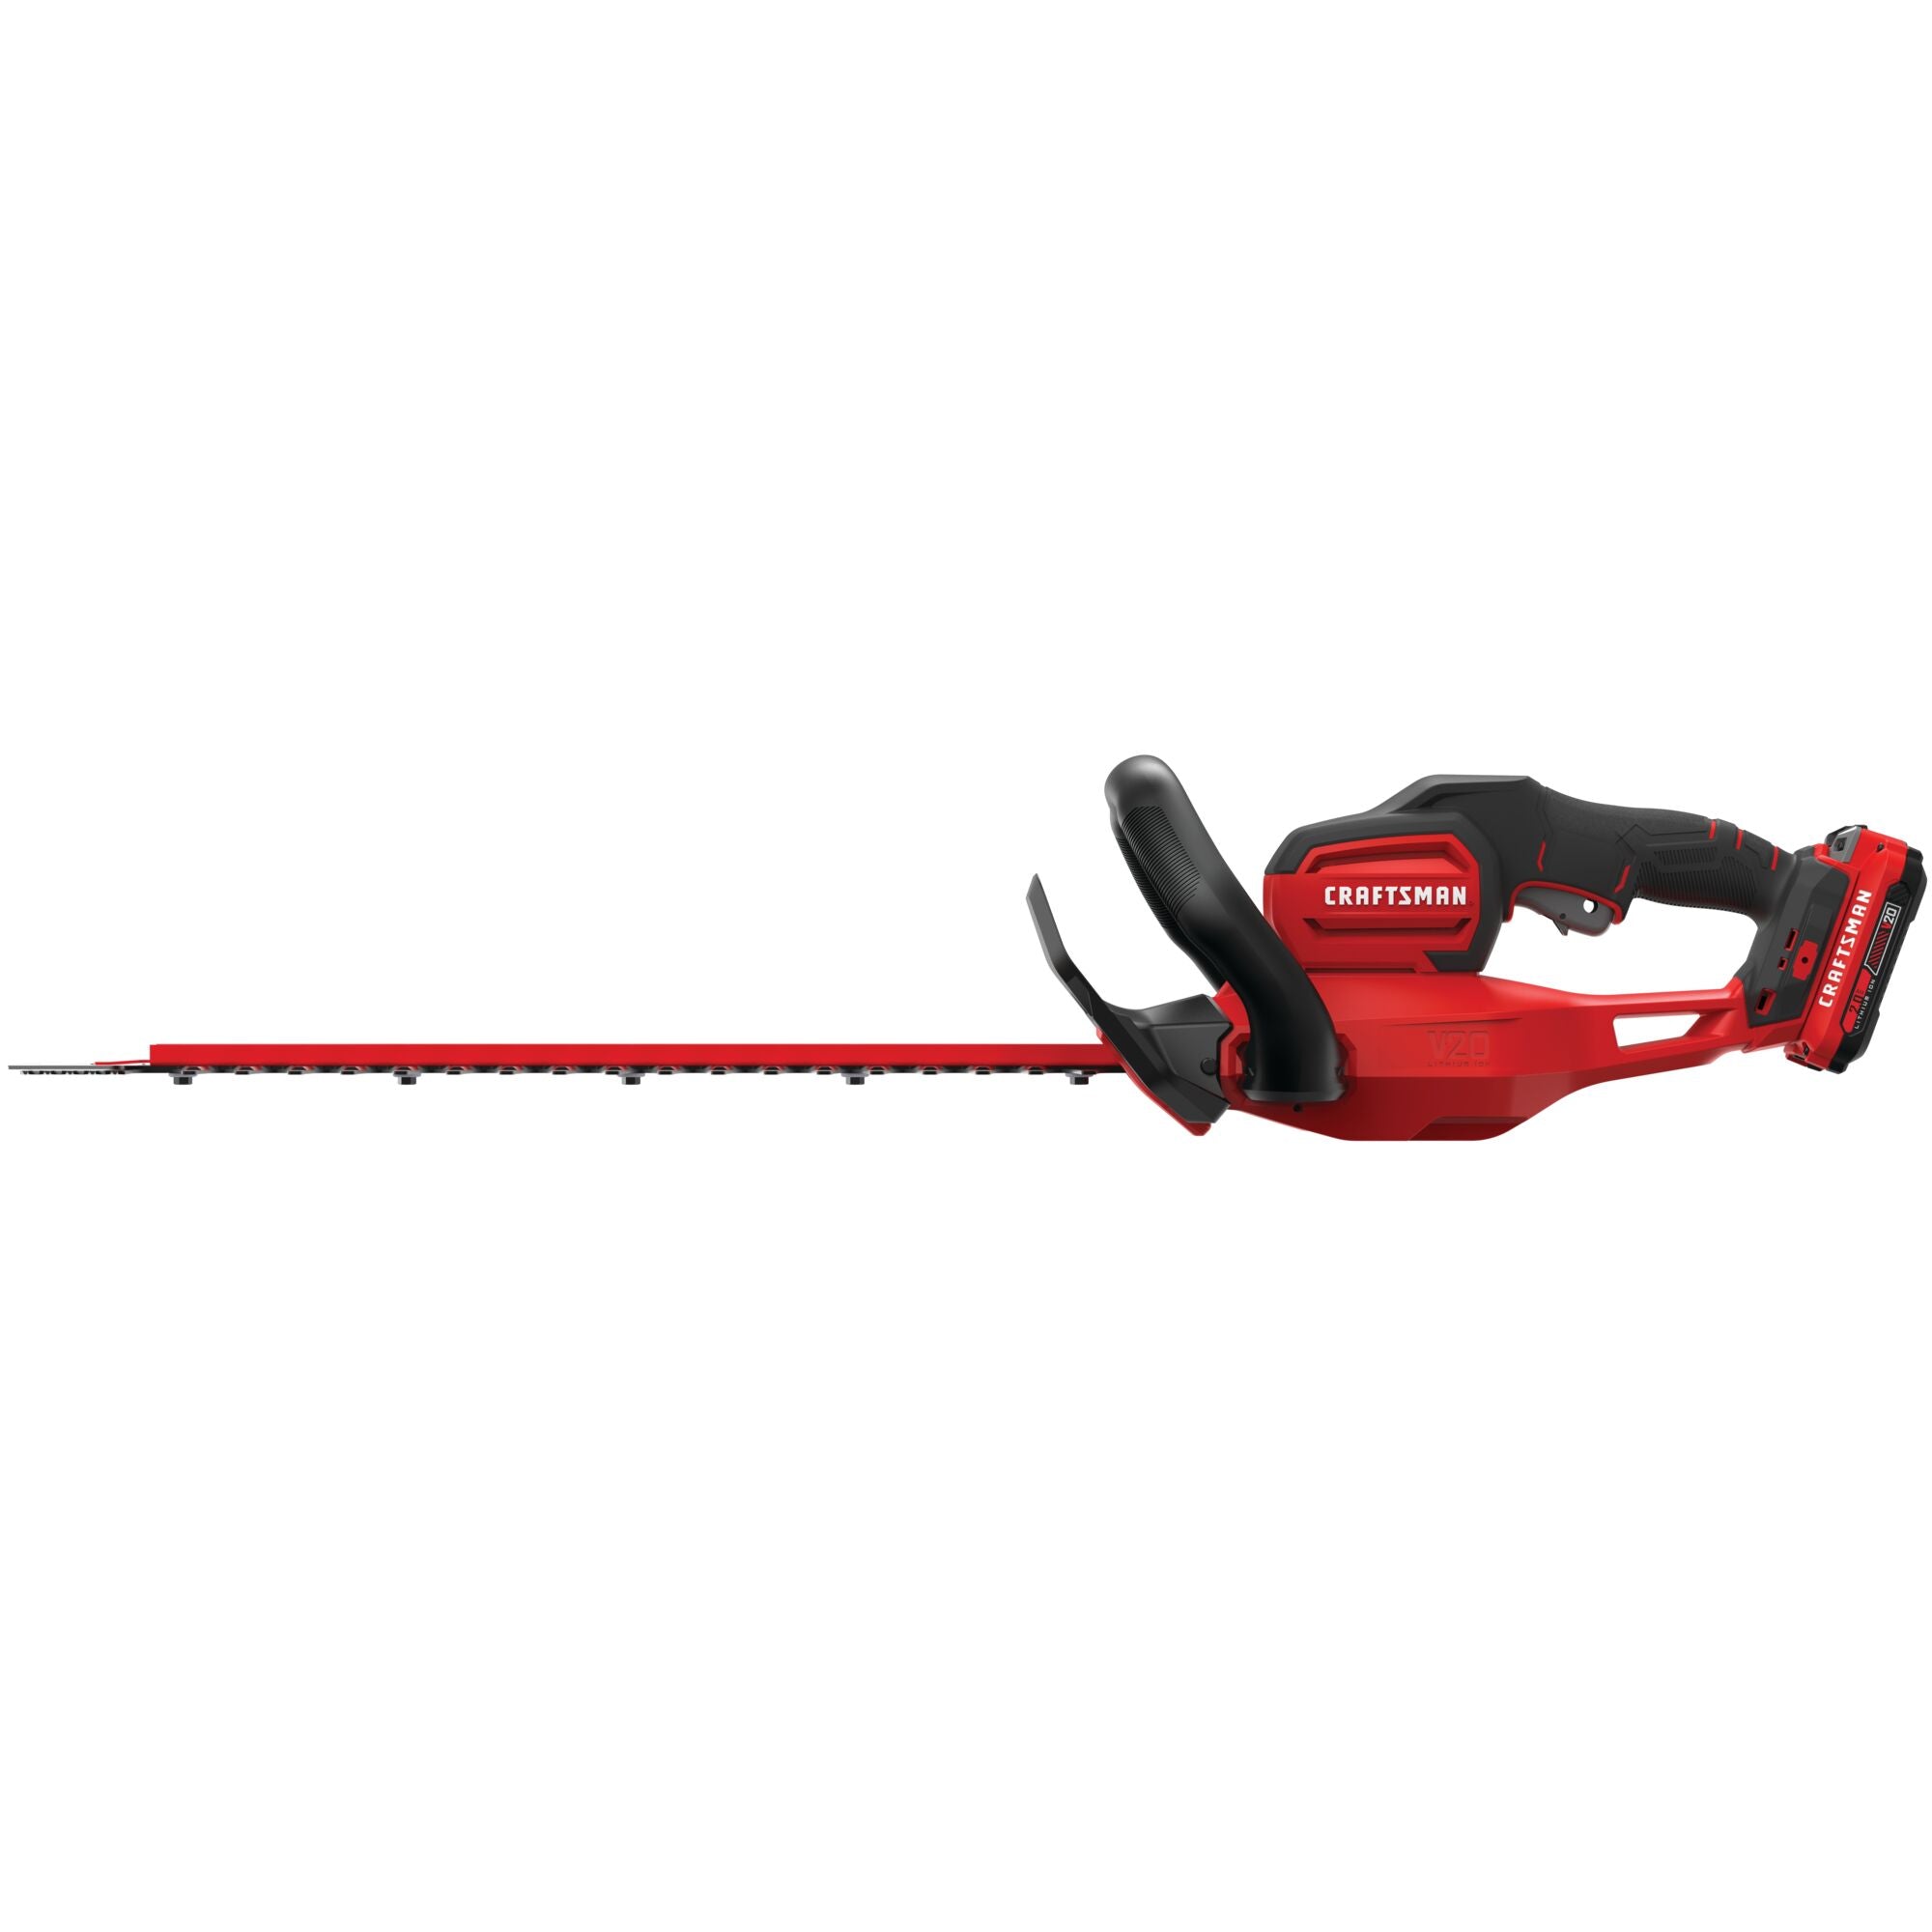 Left profile of cordless 22 inch hedge trimmer kit 2 ampere hours.